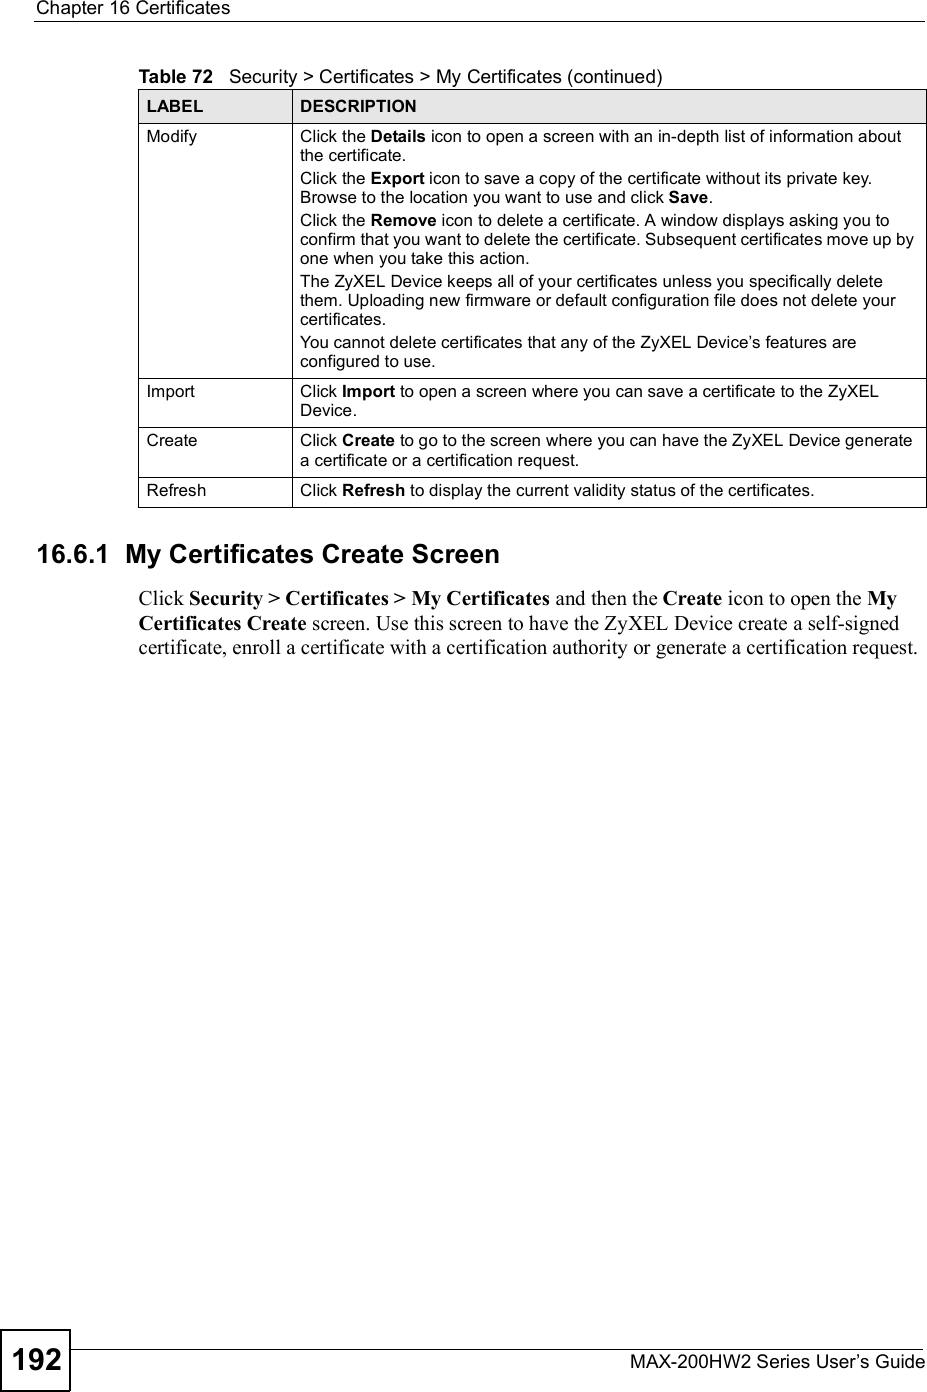 Chapter 16CertificatesMAX-200HW2 Series User s Guide19216.6.1  My Certificates Create ScreenClick Security &gt; Certificates &gt; My Certificates and then the Create icon to open the MyCertificates Create screen. Use this screen to have the ZyXEL Device create a self-signed certificate, enroll a certificate with a certification authority or generate a certification request.ModifyClick the Details icon to open a screen with an in-depth list of information about the certificate.Click the Export icon to save a copy of the certificate without its private key. Browse to the location you want to use and click Save.Click the Remove icon to delete a certificate. A window displays asking you to confirm that you want to delete the certificate. Subsequent certificates move up by one when you take this action.The ZyXEL Device keeps all of your certificates unless you specifically delete them. Uploading new firmware or default configuration file does not delete your certificates.You cannot delete certificates that any of the ZyXEL Device s features are configured to use.ImportClick Import to open a screen where you can save a certificate to the ZyXEL Device.CreateClick Create to go to the screen where you can have the ZyXEL Device generate a certificate or a certification request.RefreshClick Refresh to display the current validity status of the certificates.Table 72   Security &gt; Certificates &gt; My Certificates (continued)LABEL DESCRIPTION